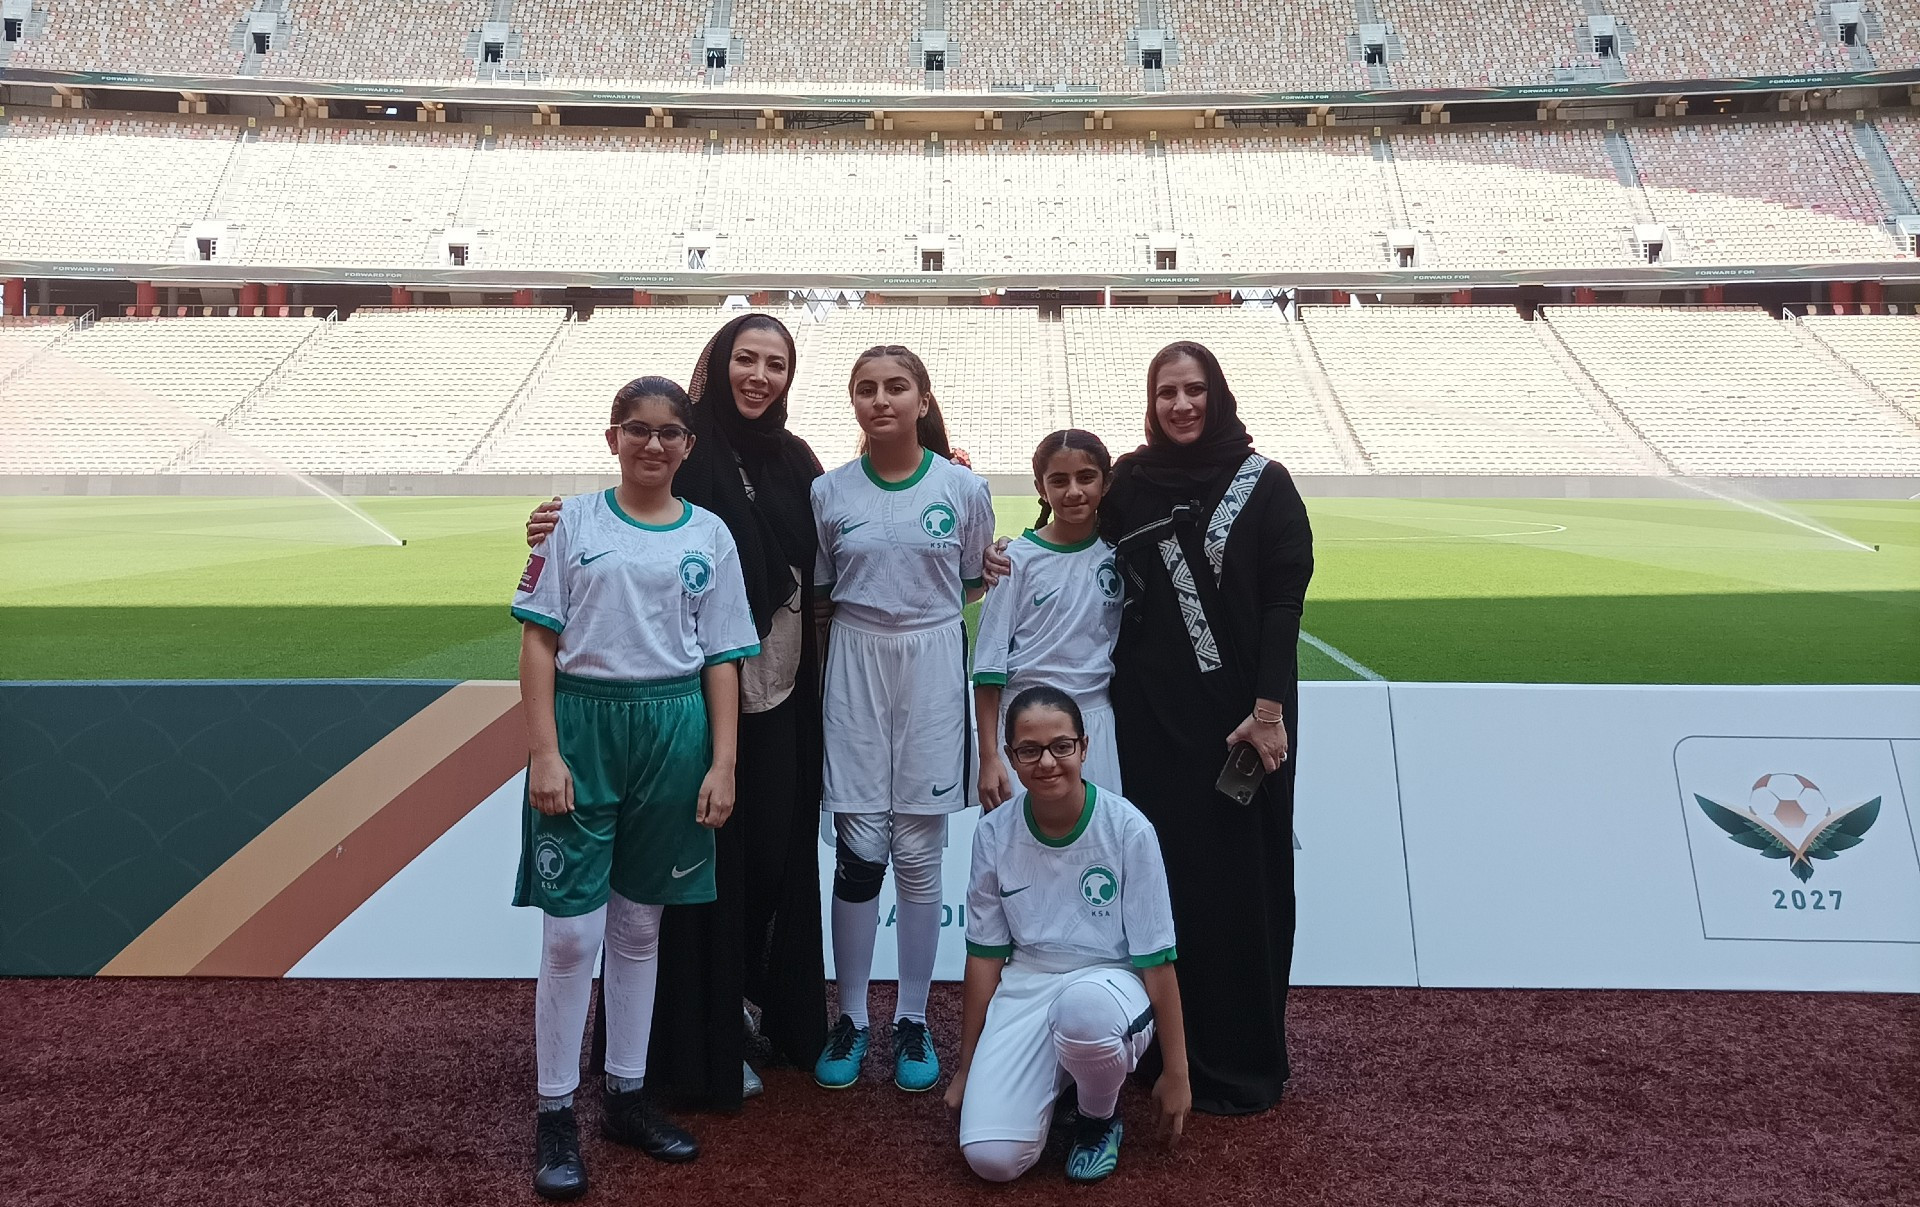 The first 11-a-side women's football league is set to be launched in Saudi Arabia ©ITG